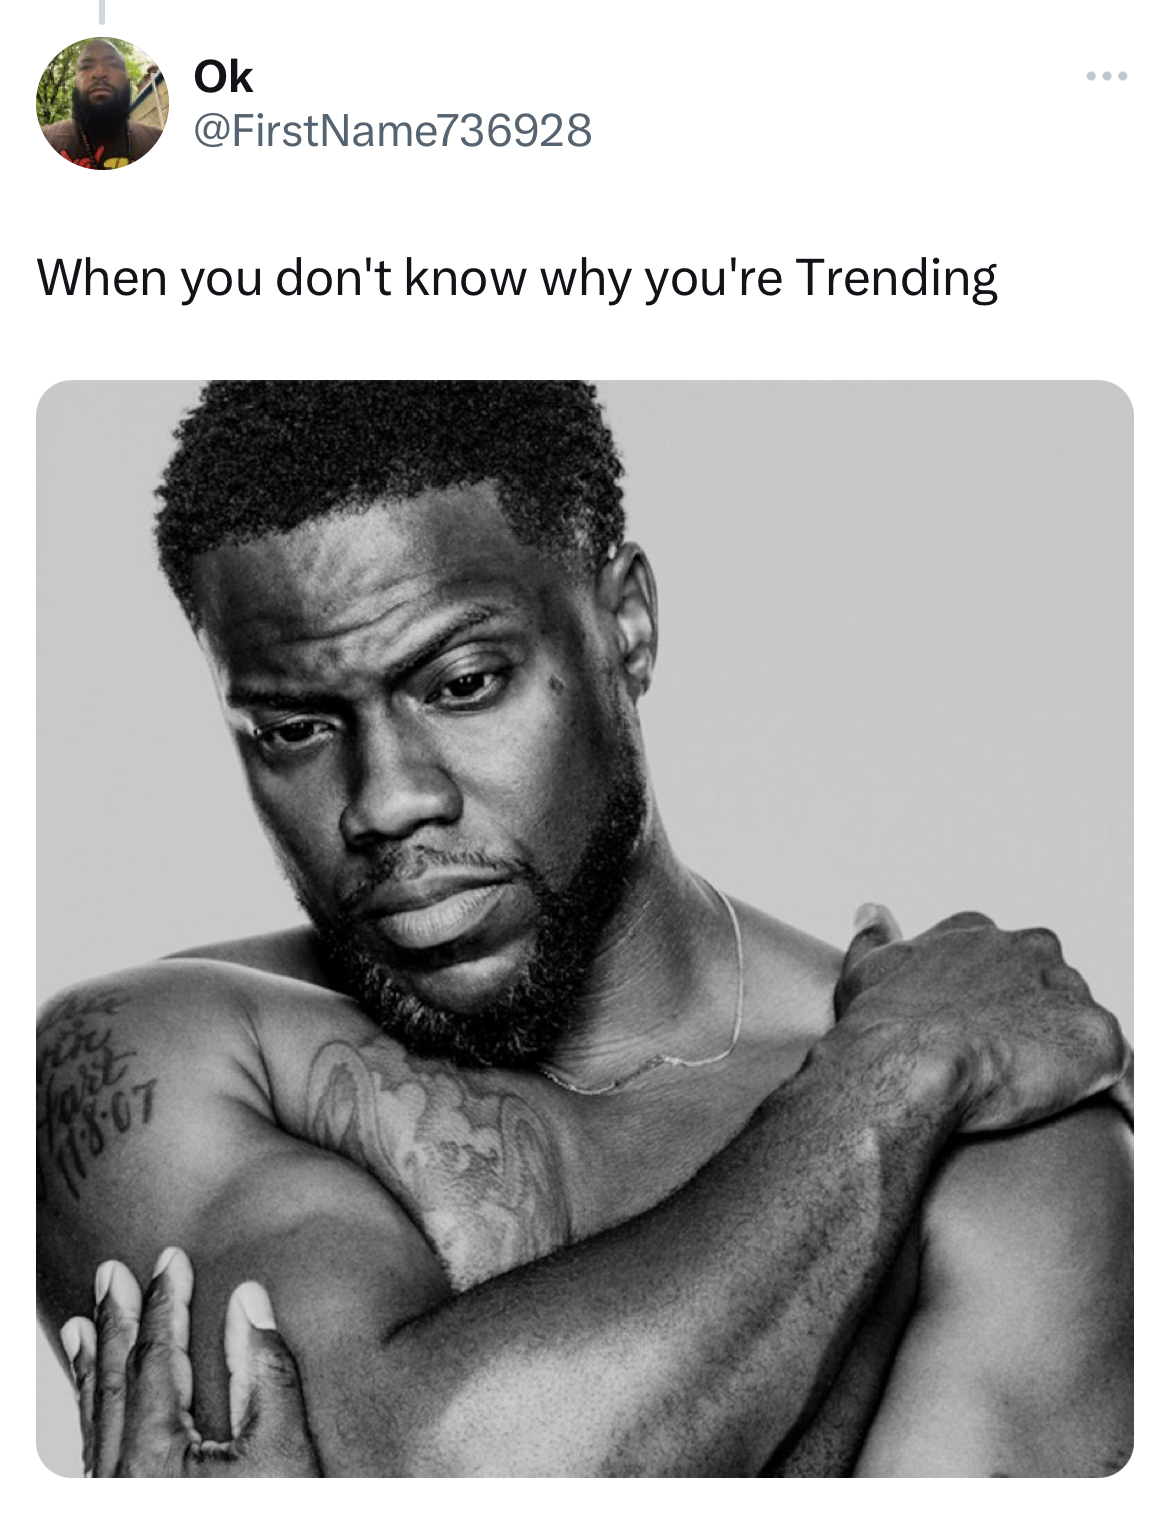 Kevin Hart trending memes - kevin hart before and after car accident - Ok When you don't know why you're Trending 15